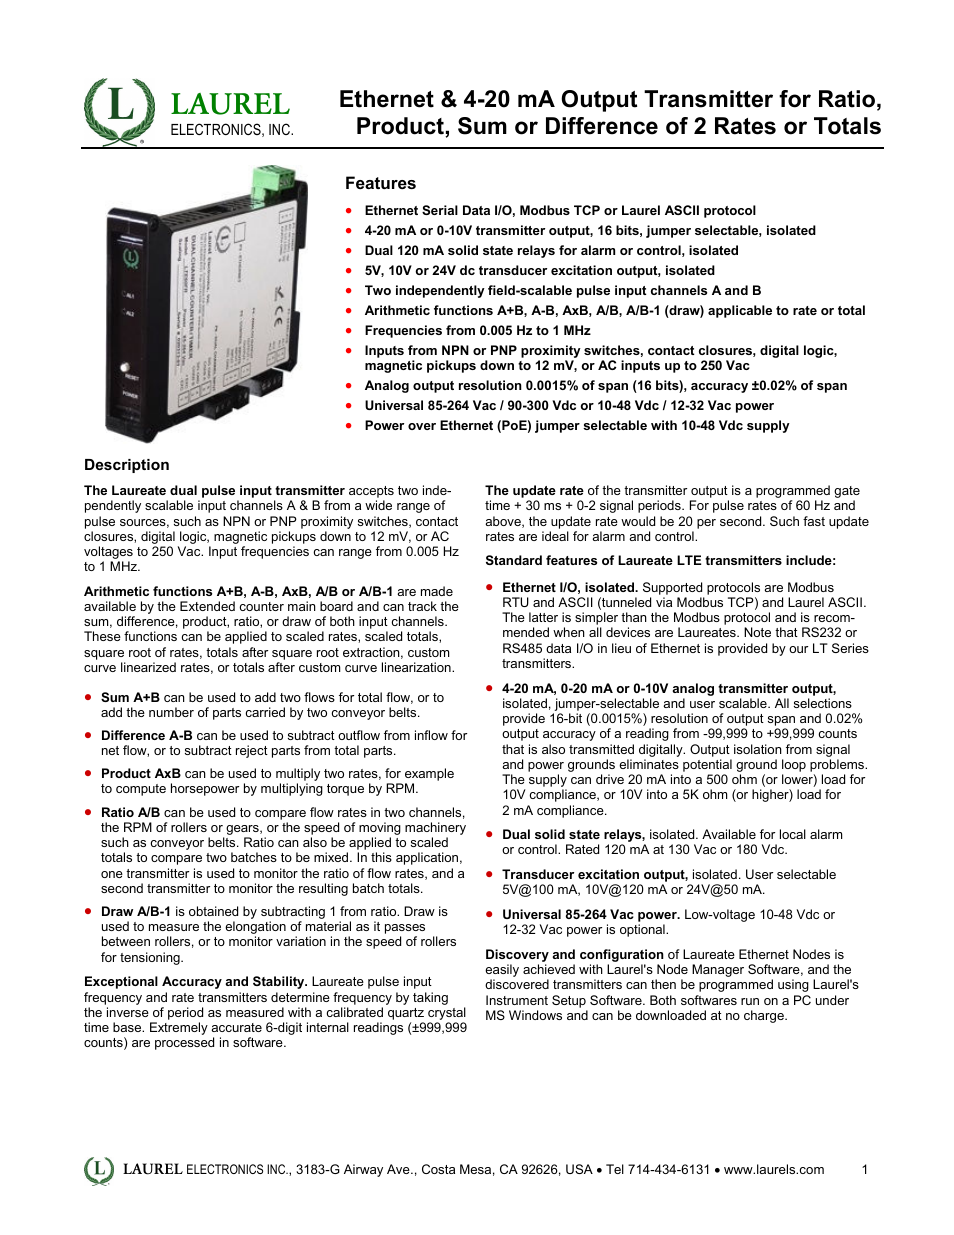 LTE: Ethernet & 4-20 mA Output Transmitter for Ratio